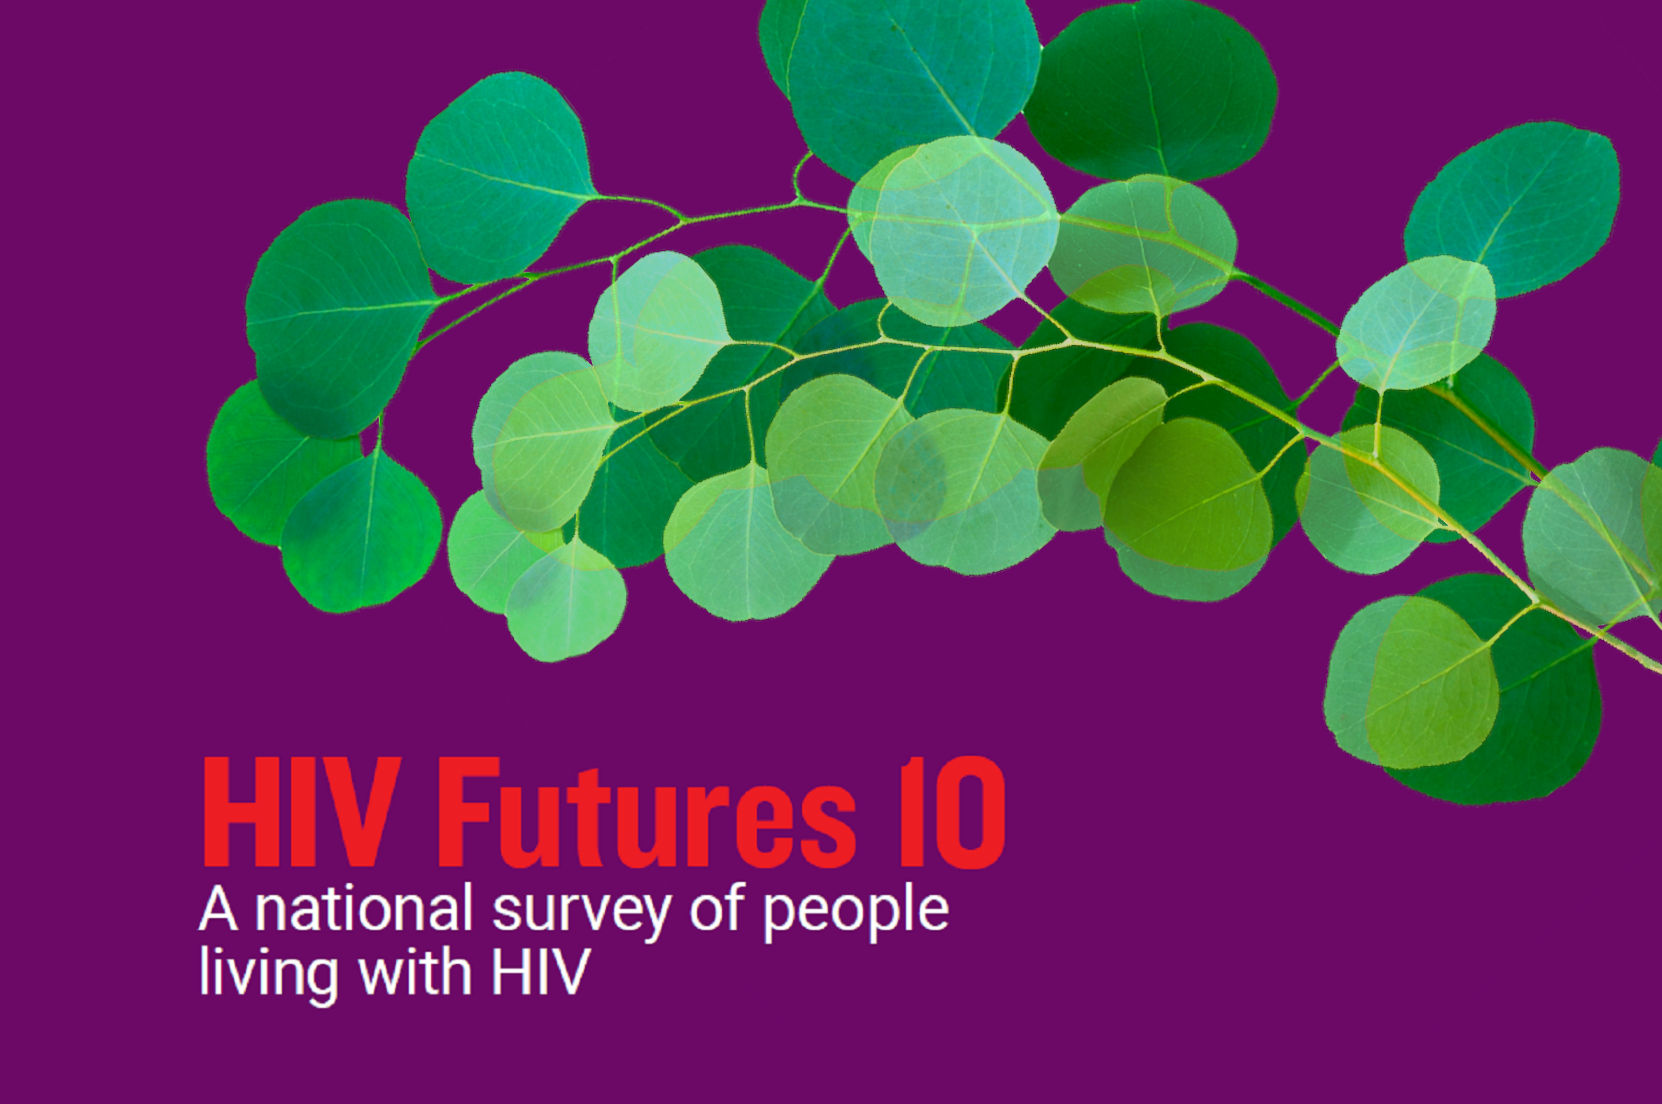 Design of bright green round Silver Princess gum leaves on a plum background with the text 'HIV Futures 10: A national survey of people living with HIV